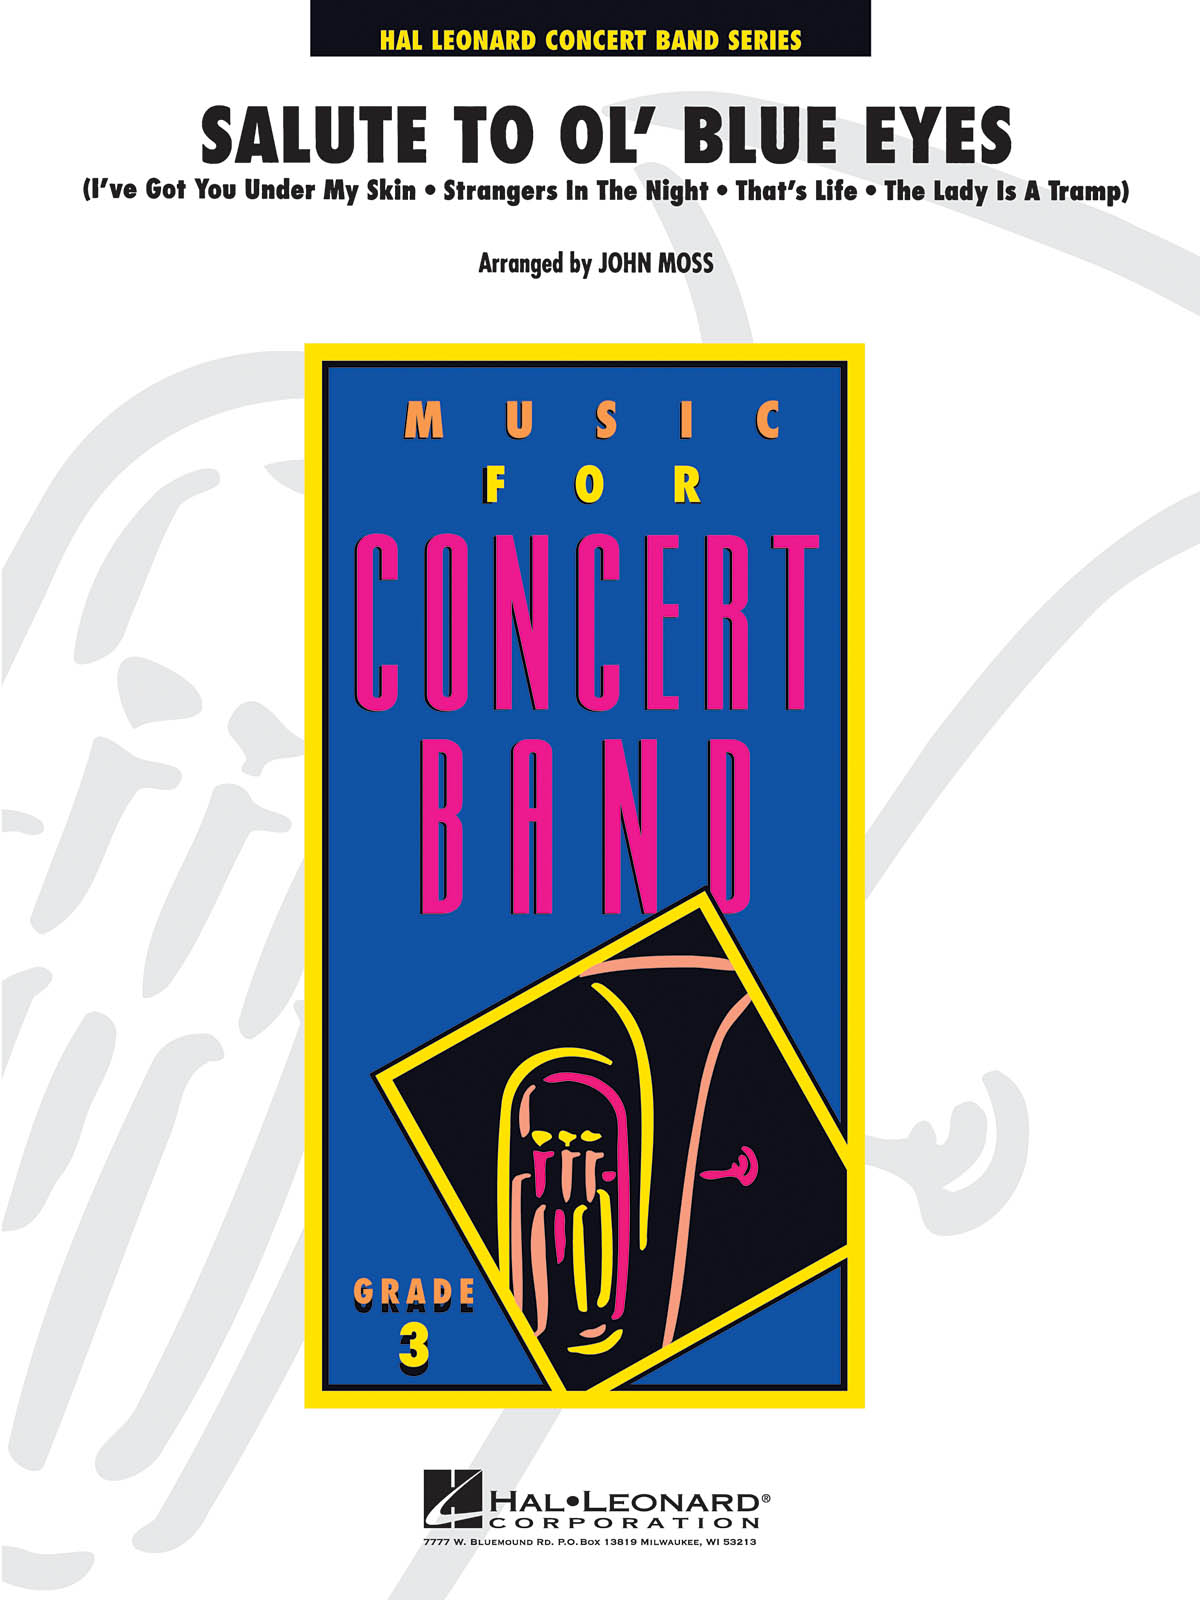 Salute to Ol' Blue Eyes: Concert Band: Score & Parts